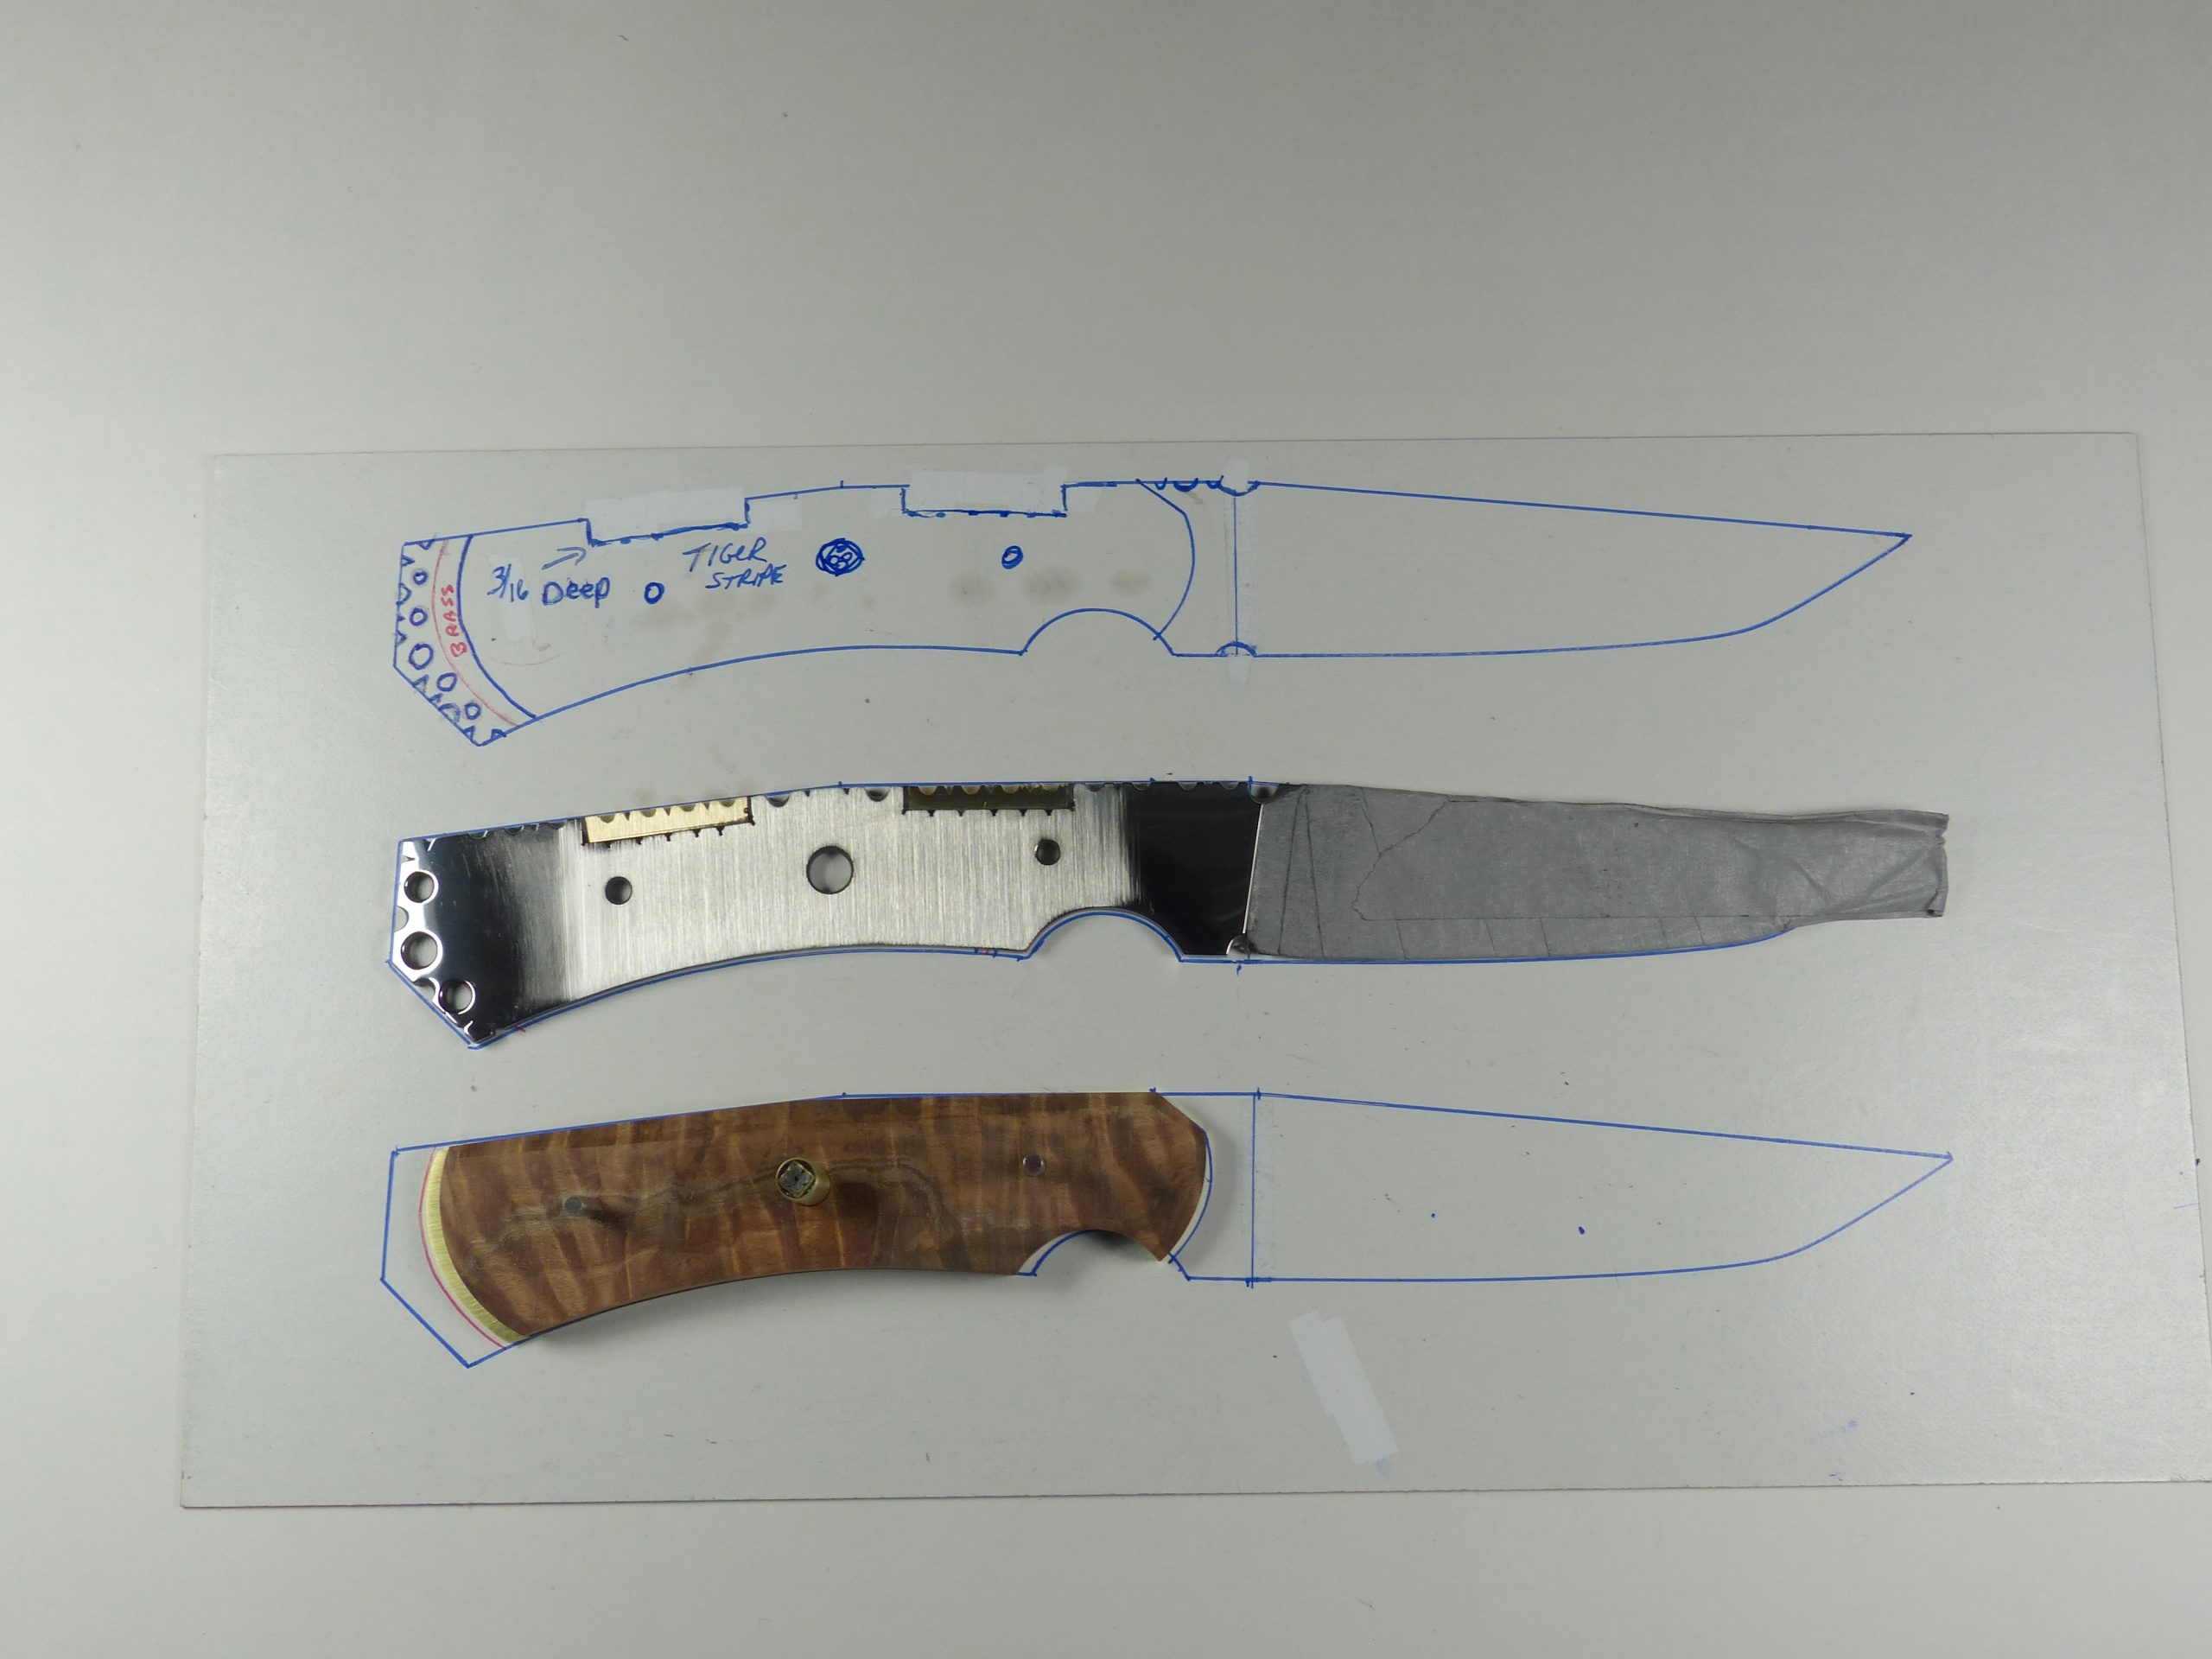 Side view of partially assembled knife and working drawing